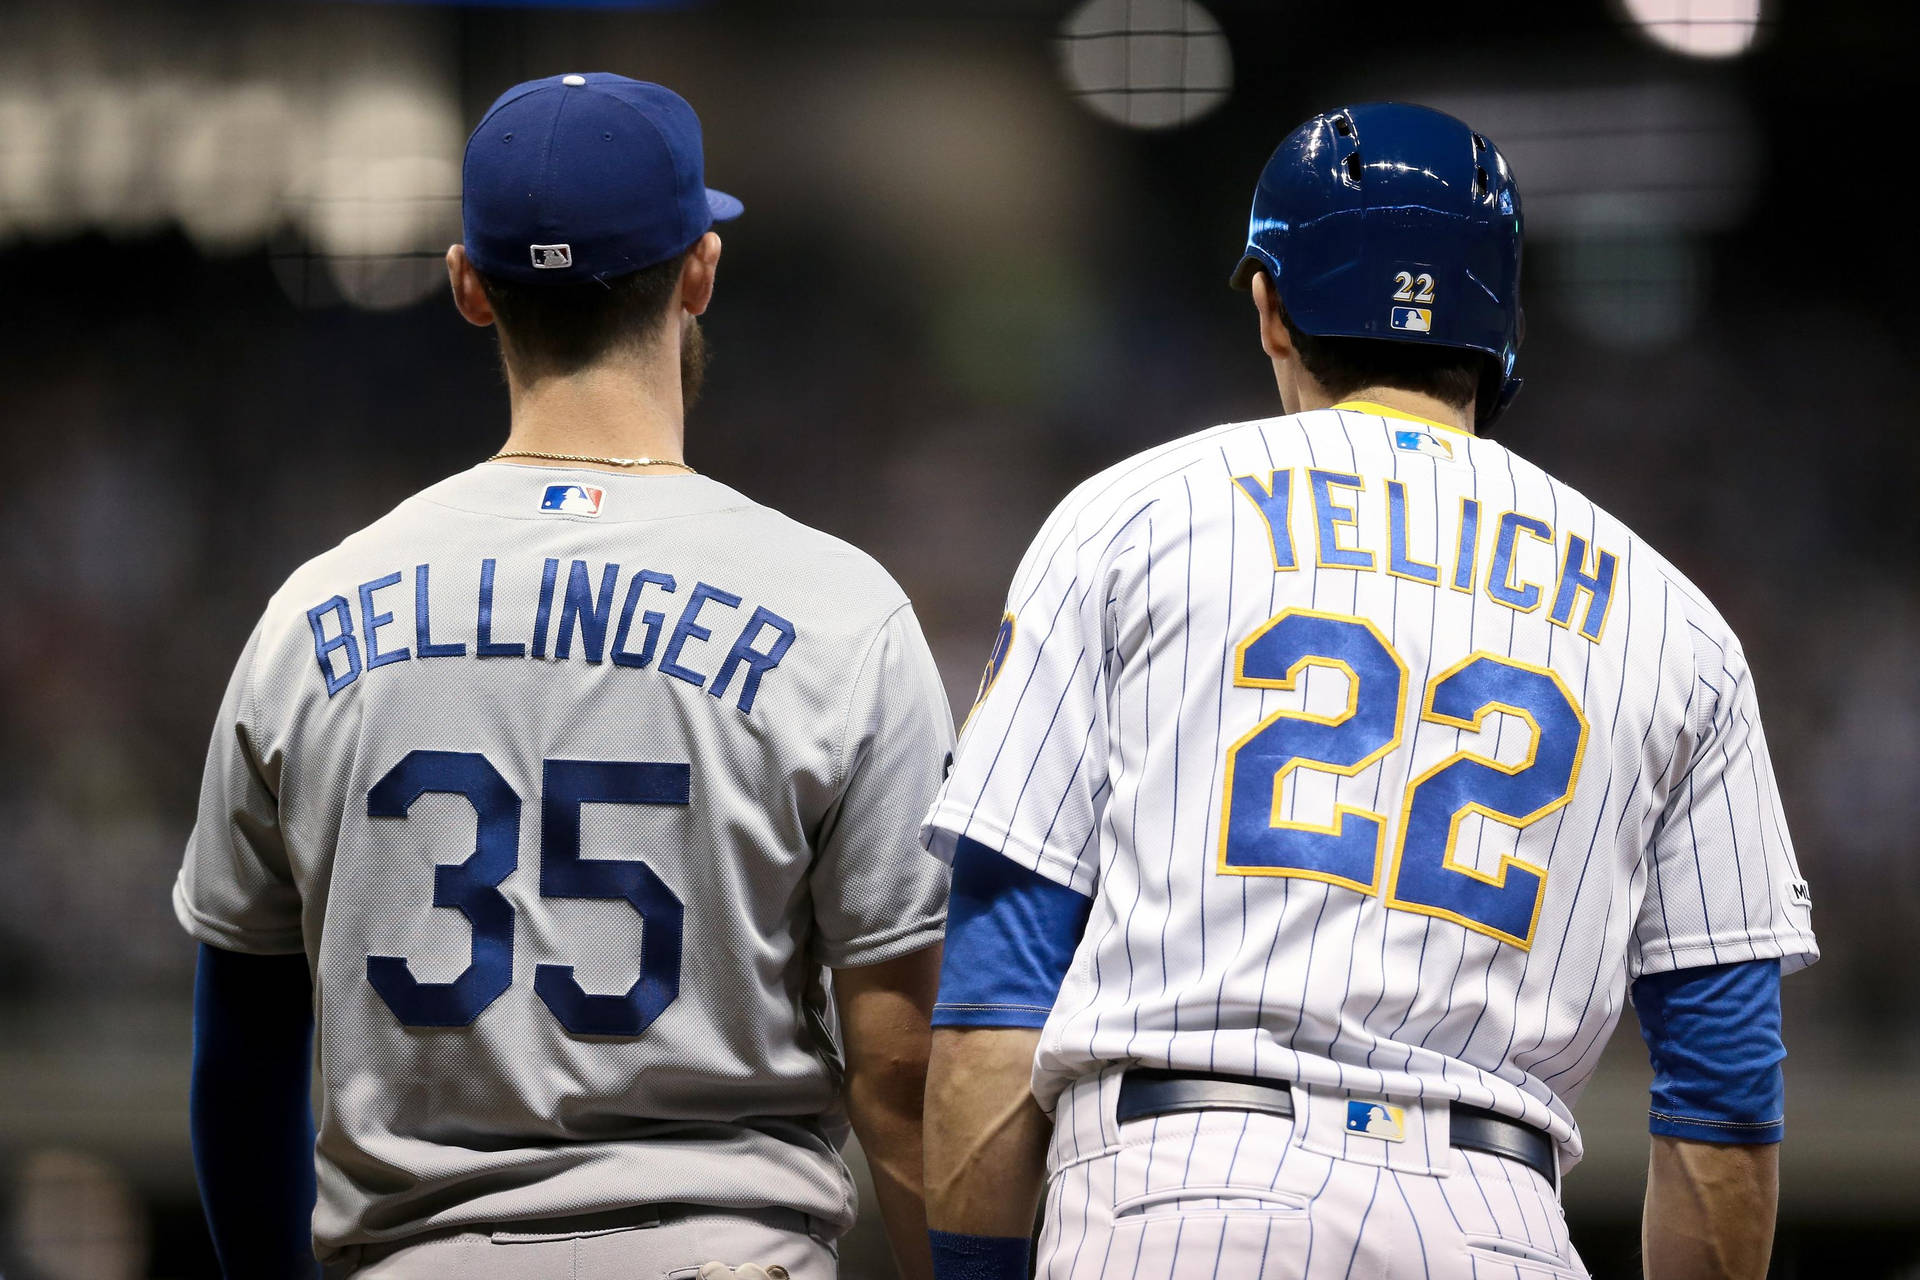 Cody Bellinger And Christian Yelich Wallpaper